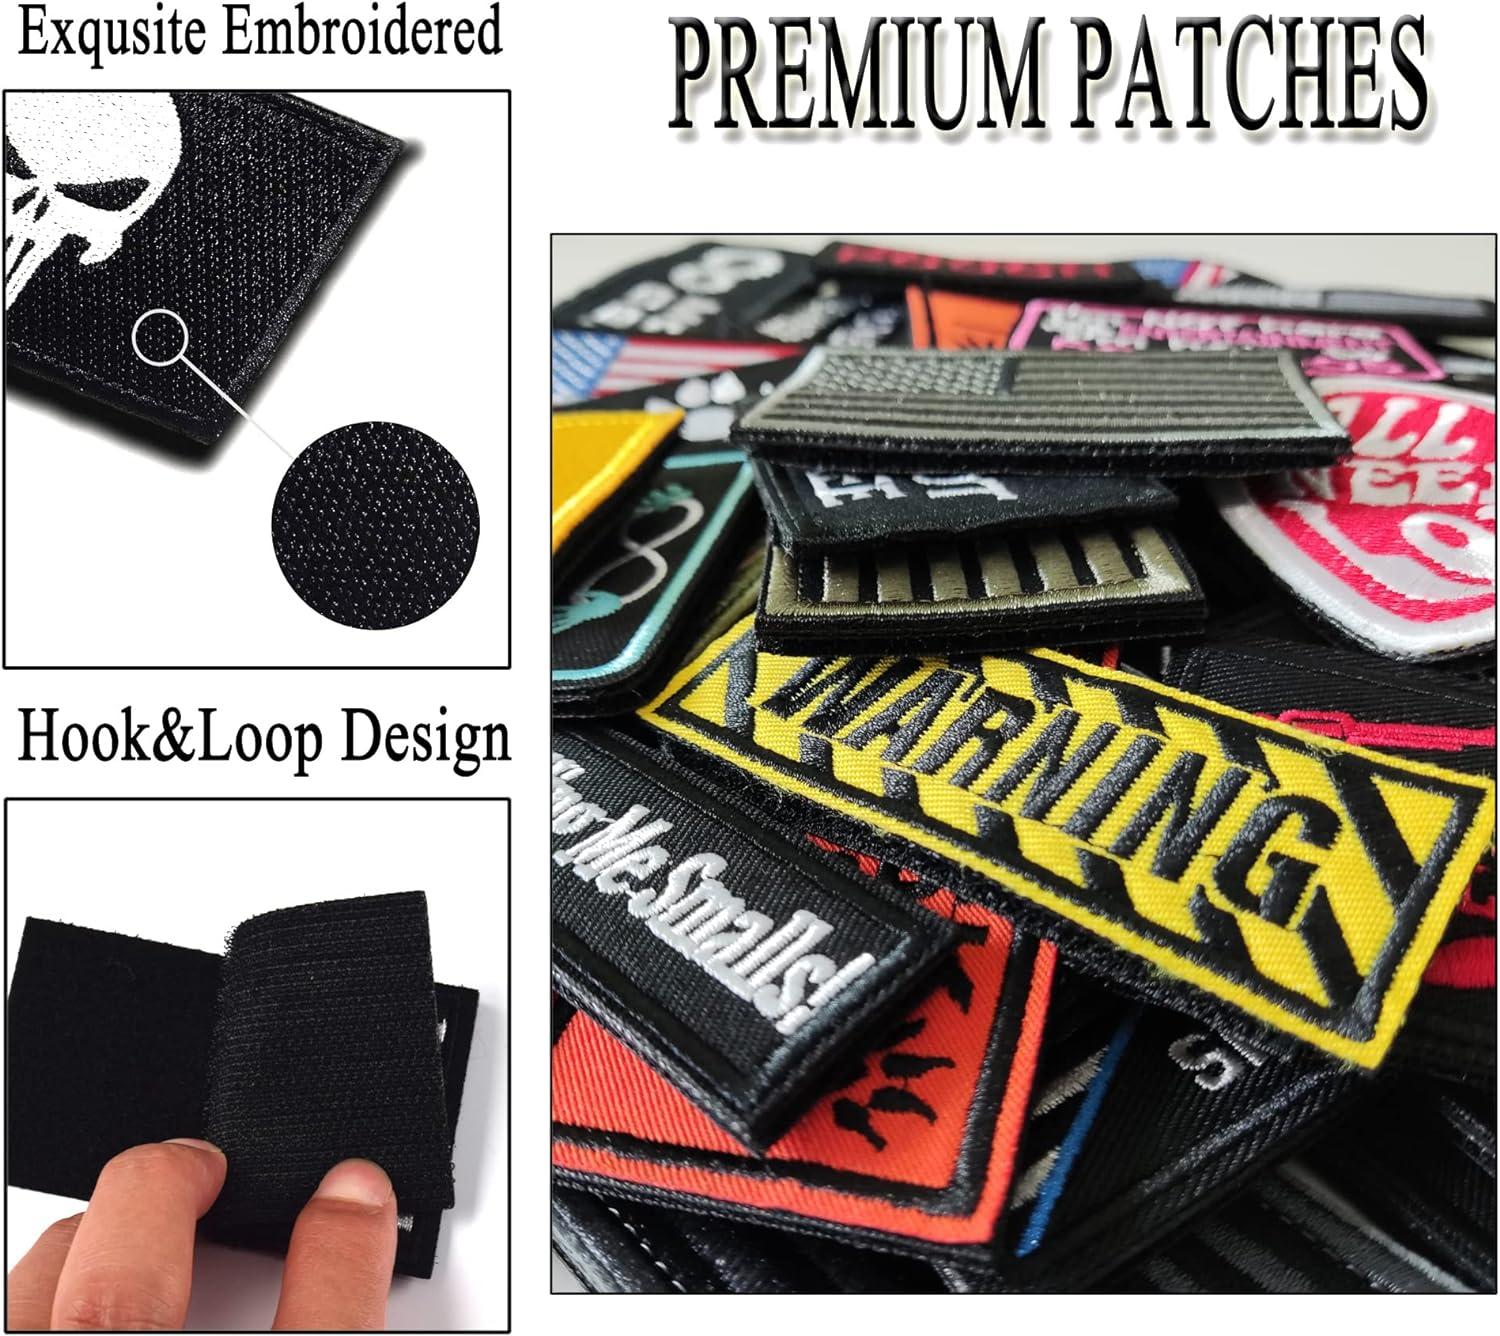 Harsgs 20 Pieces Random Tactical Morale Patch Bundle Full Embroidery Loop  and Hook Patches Set for Caps Bags Backpacks Vest Military Uniforms Tactical  Gears Etc 20PCS Random